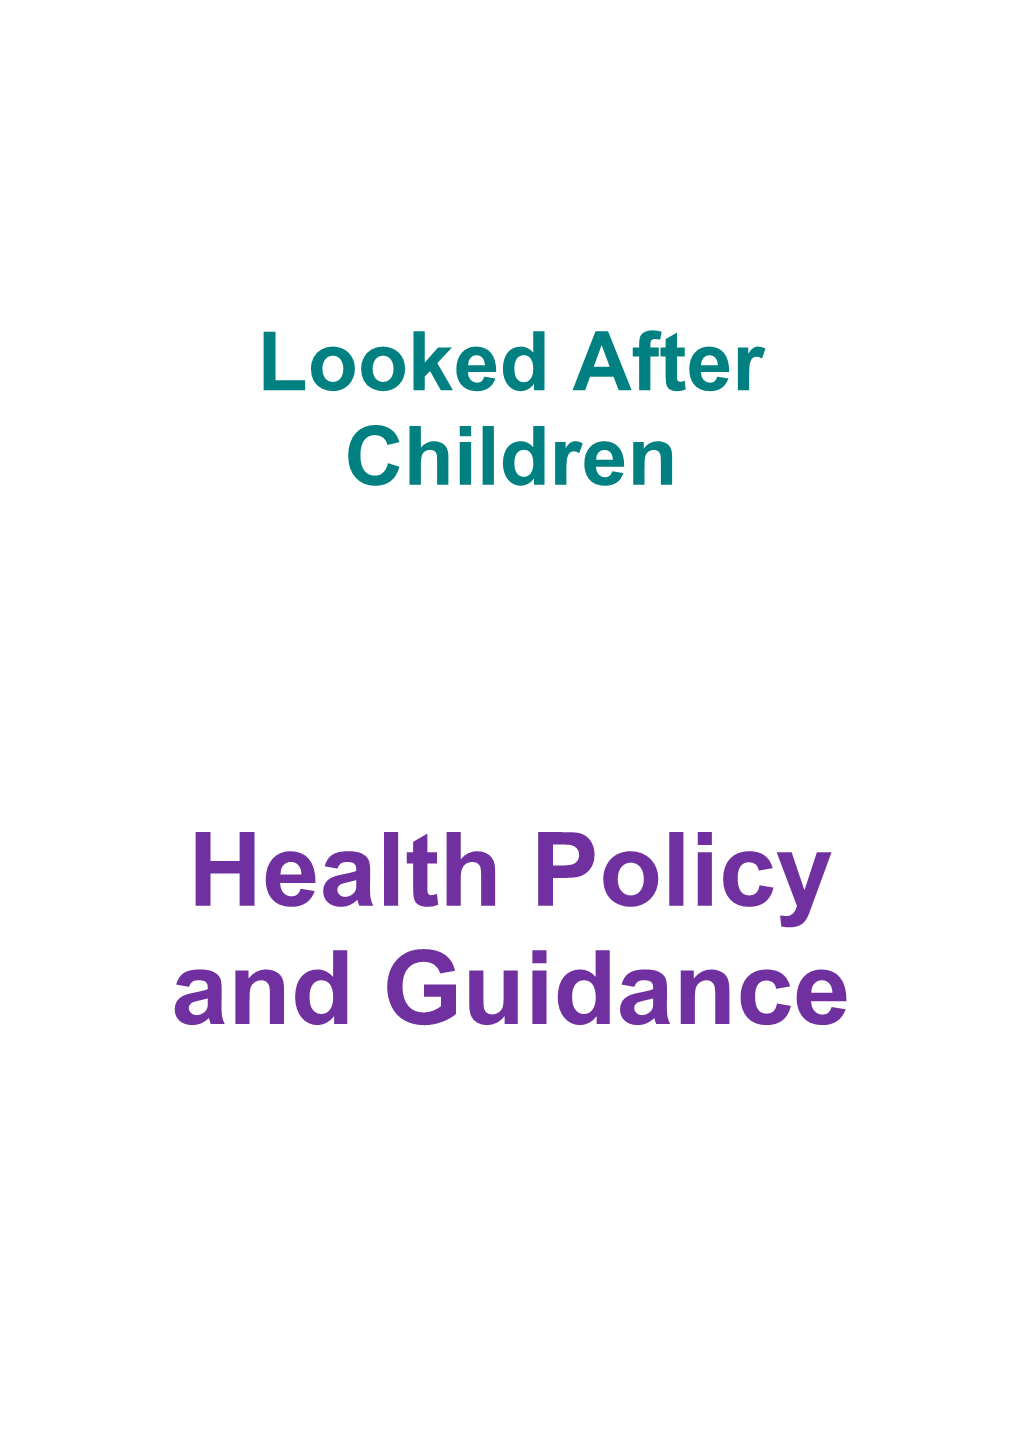 Health Policy and Guidance